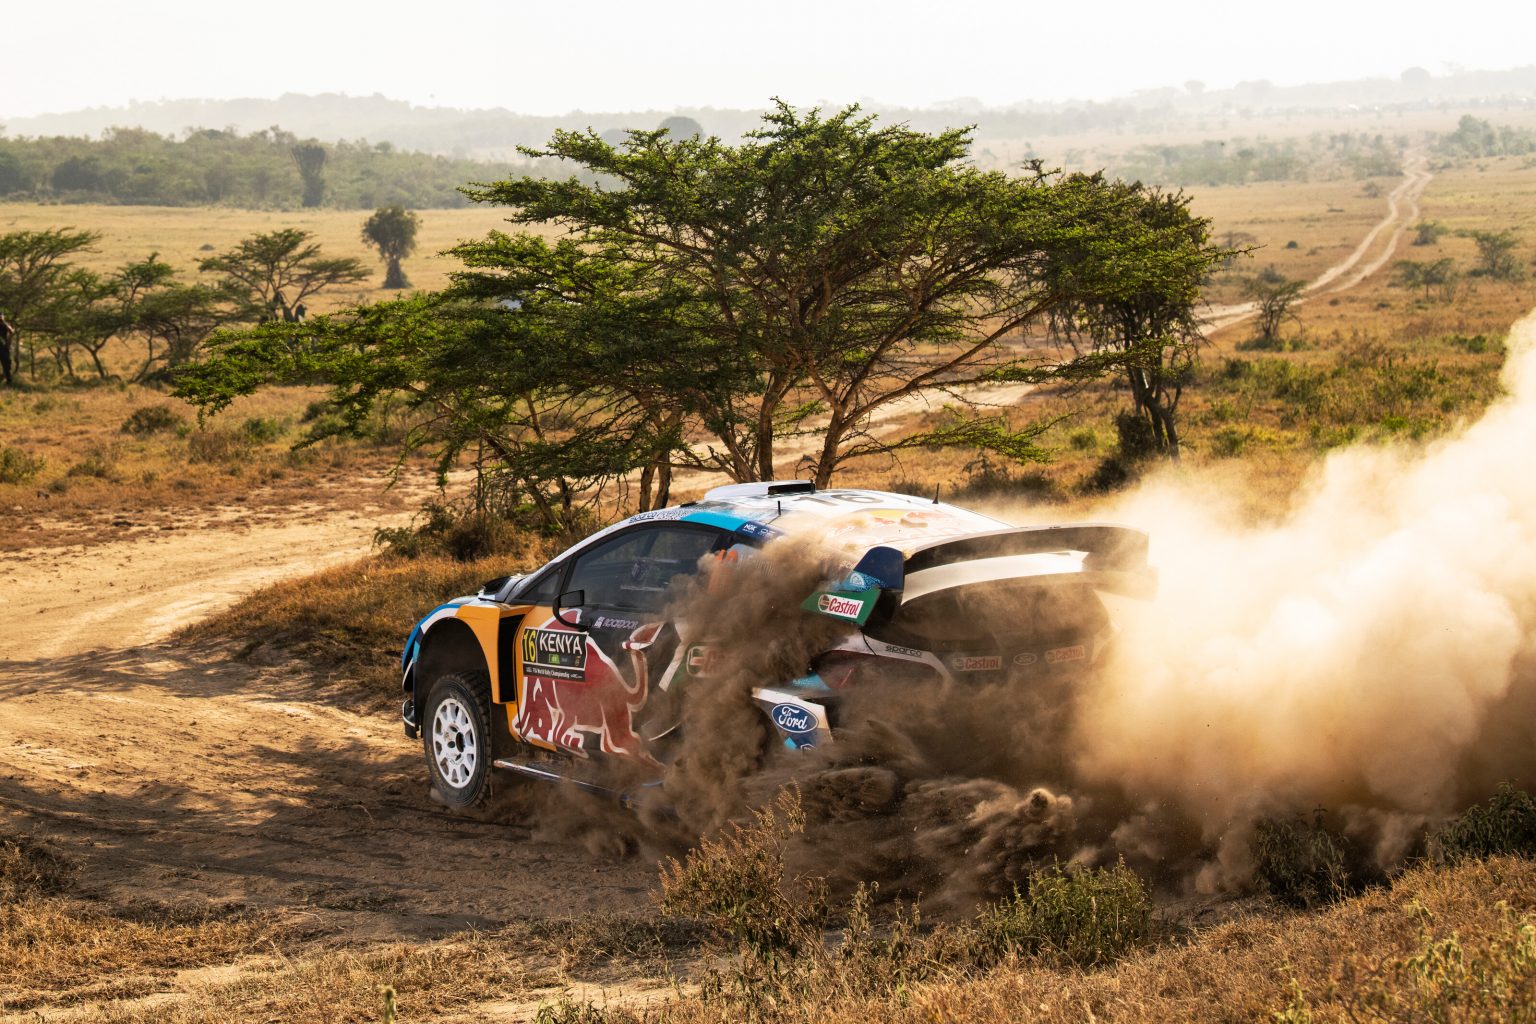 Adrien Fourmaux (FRA) Renaud Jamoul (BEL) of team  M-Sport are seen performing during the  World Rally Championship Kenya in Naivasha, Kenya on June 26, 2021 // Jaanus Ree/Red Bull Content Pool // SI202106260427 // Usage for editorial use only //